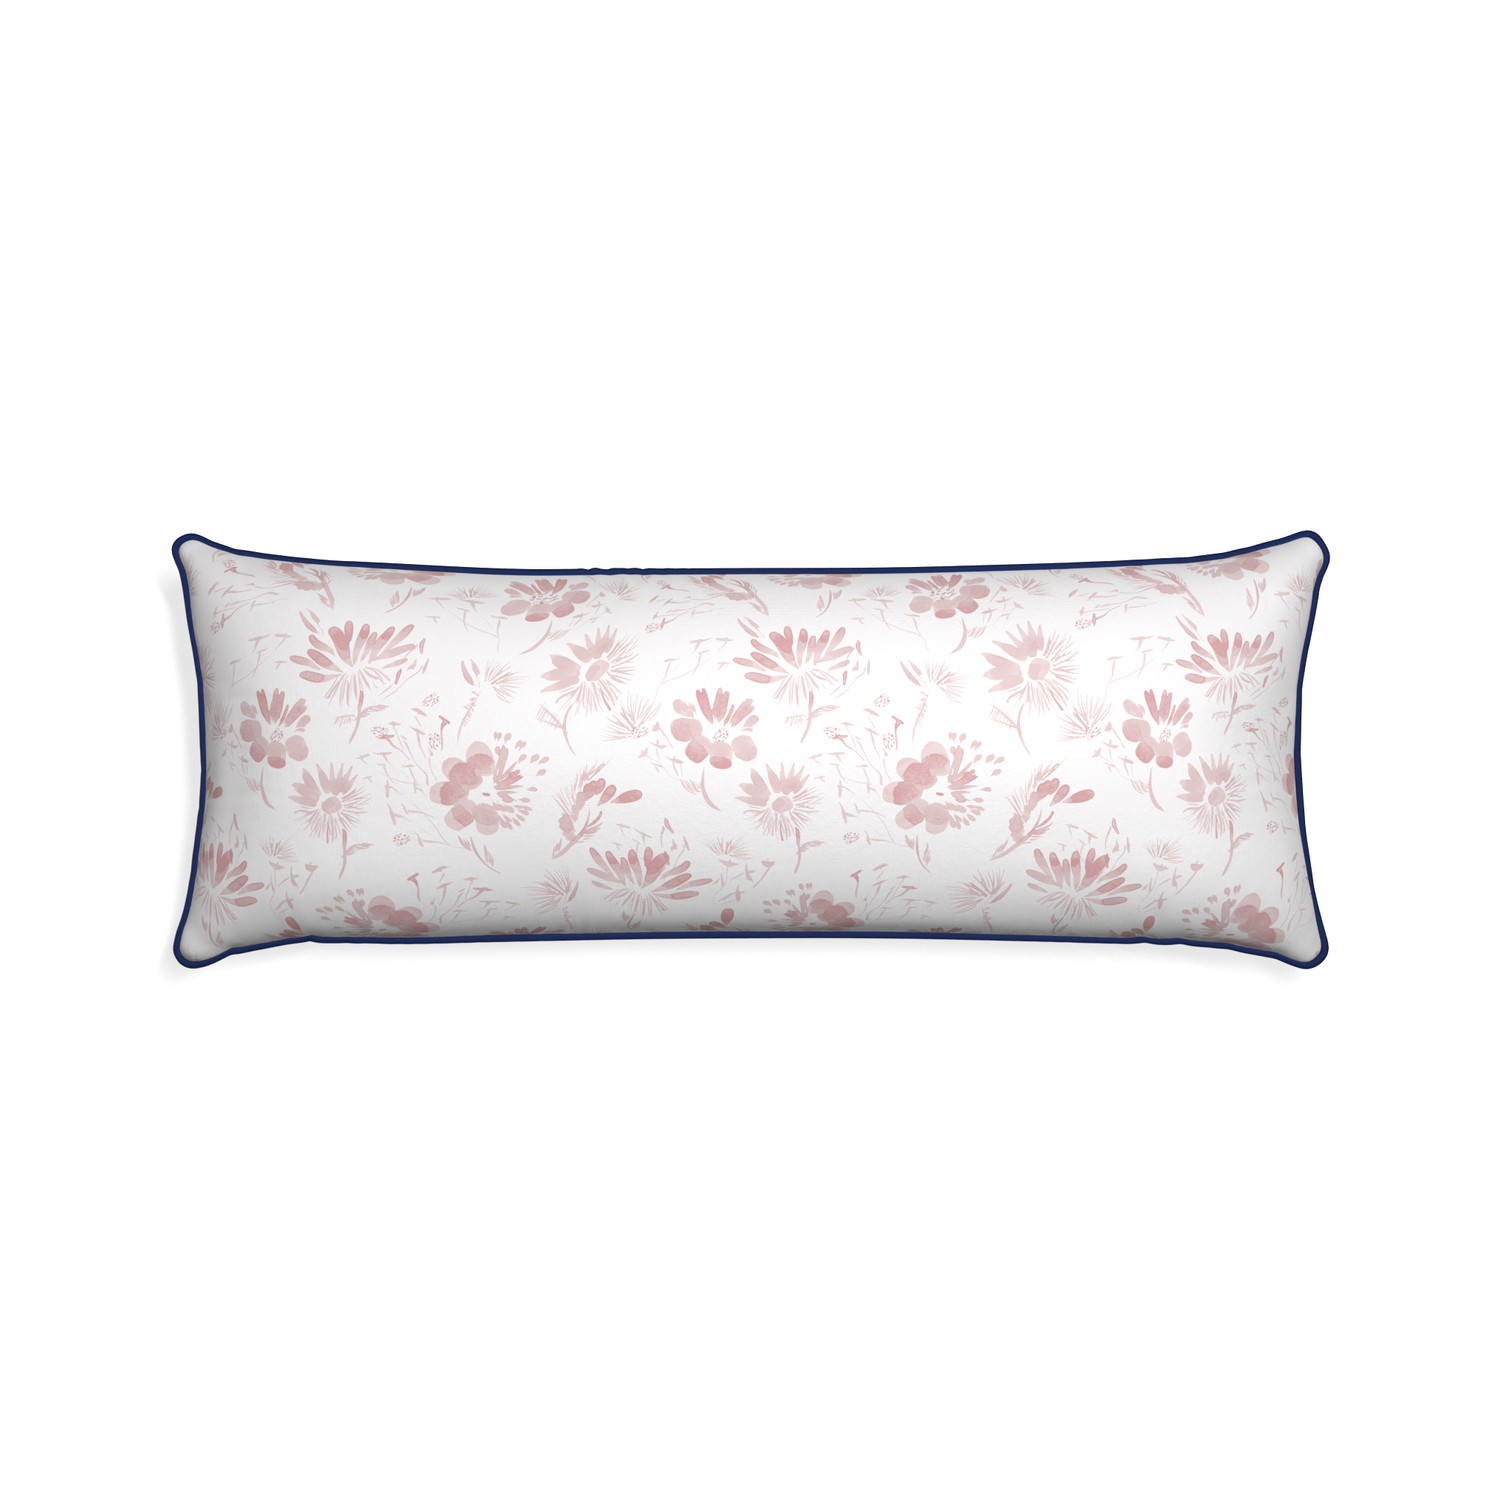 Xl-lumbar blake custom pillow with midnight piping on white background